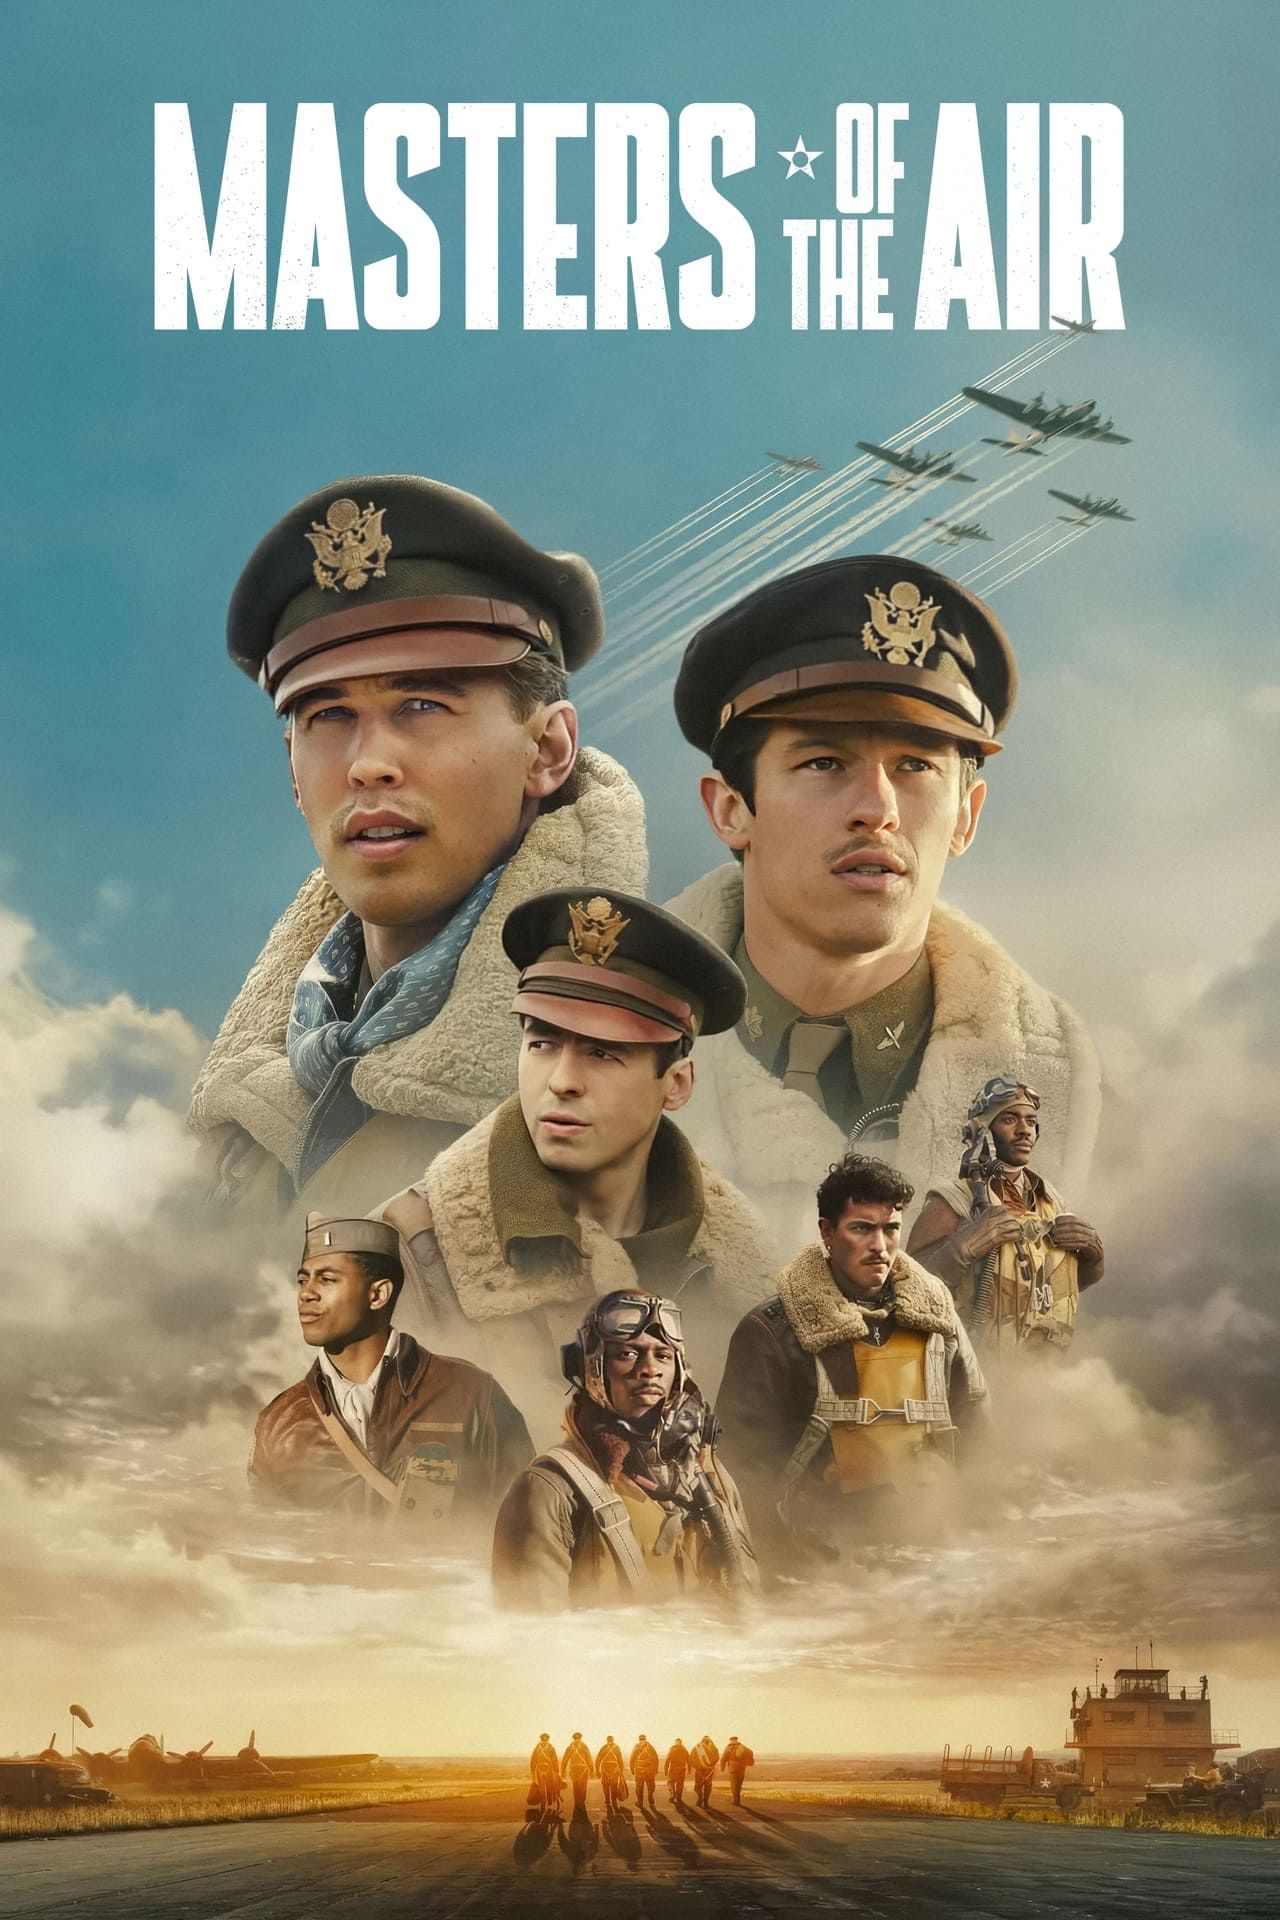 Masters of the Air TV Show Poster showing Austin Butler and Several Air Pilots in World War II Uniforms